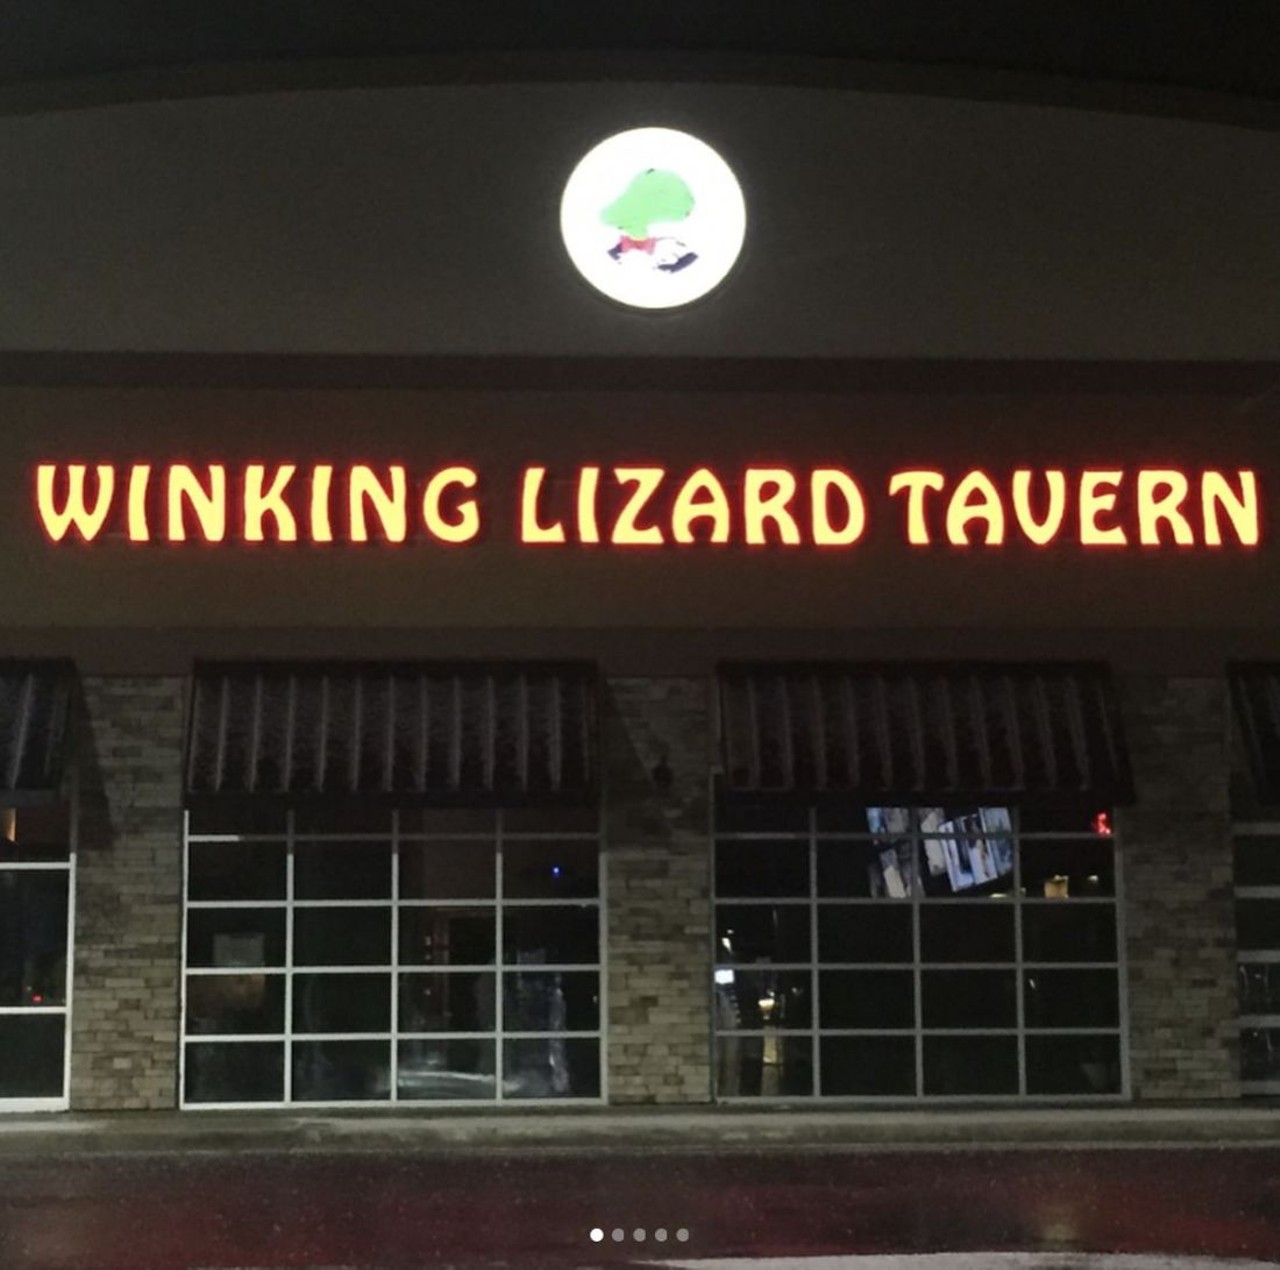  Winking Lizard
Multiple Locations
No restaurant is more synonymous with chicken wings in Northeast Ohio then Winking Lizard. With 15 locations in the area, it&#146;d be hard to throw a stone without hitting the nearest Lizard. Our favorite wing sauce is spicy barbeque, but try the 911 if you&#146;re feeling adventurous. 
Photo via @WinkingLizardTavern/Instagram